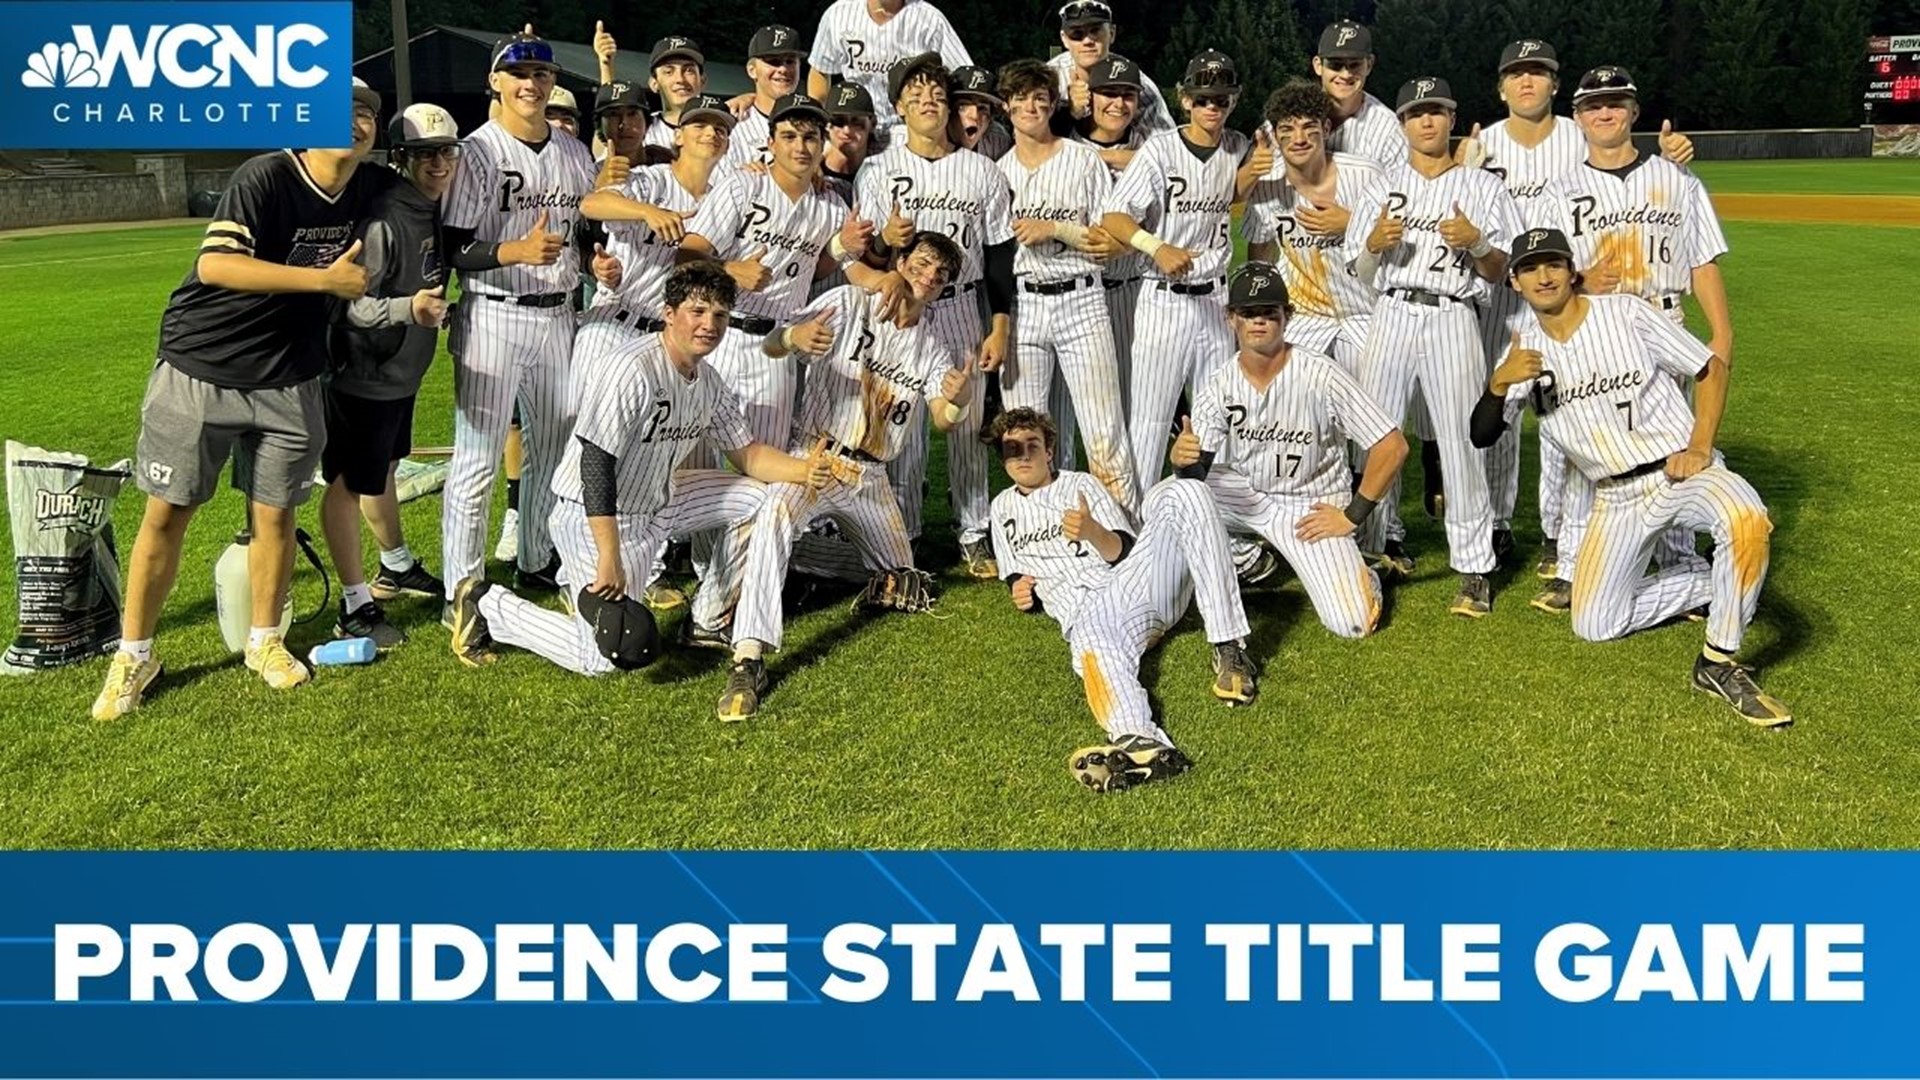 Providence HS enters the state championship series undefeated and ranked No. 1. But for coach Danny Hignight, it's not about wins but knowing the value of hard work.